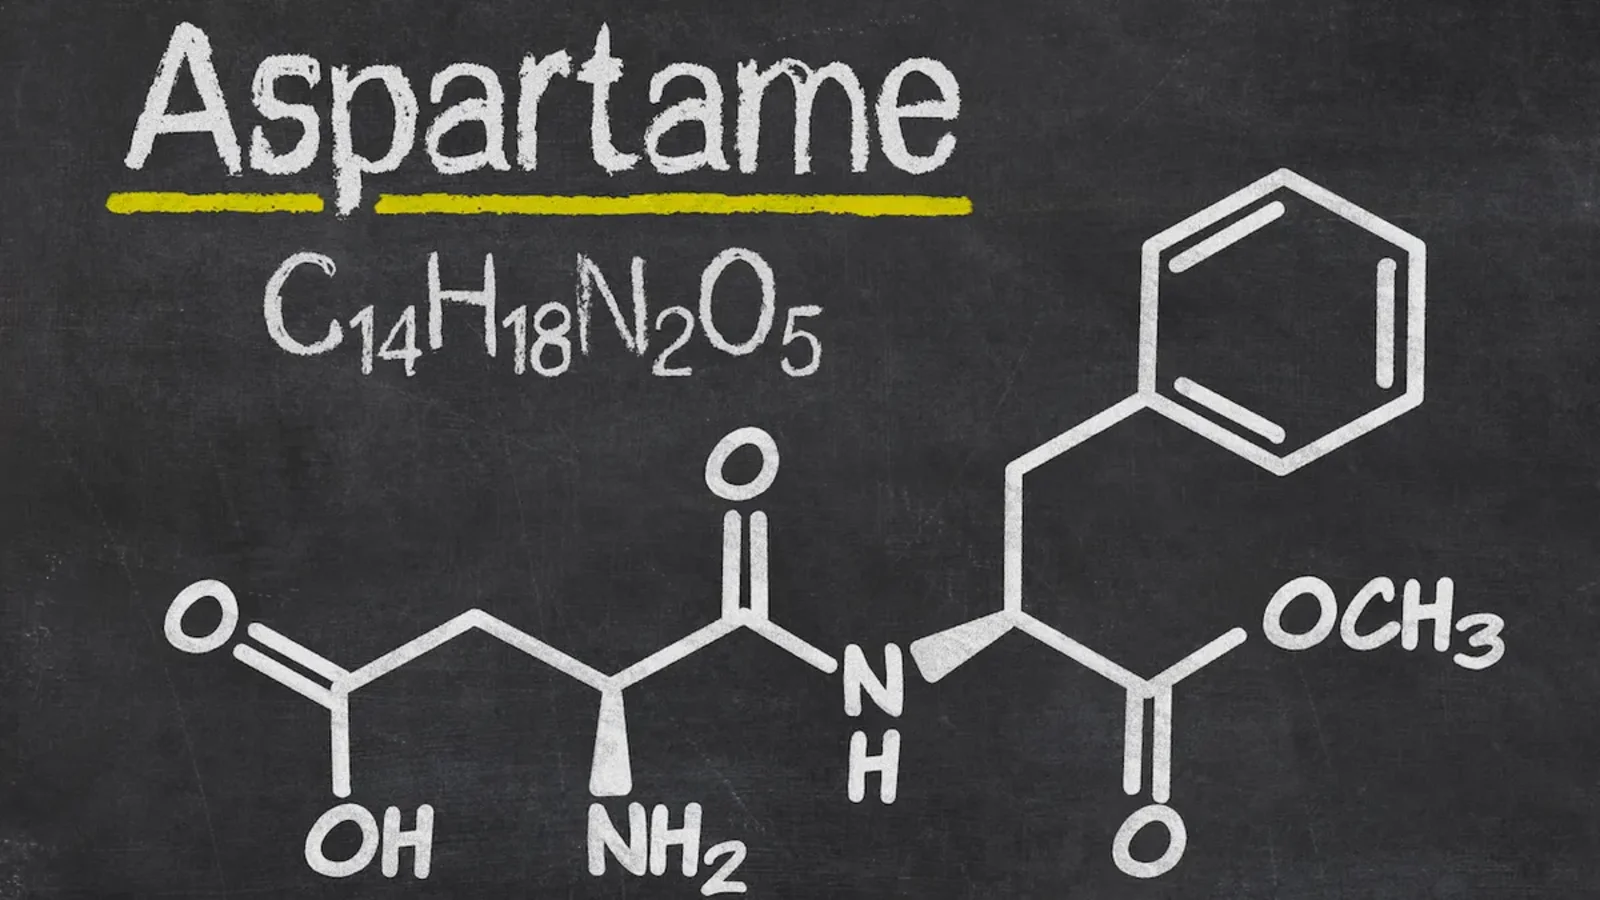 WHO declares aspartame possible carcinogen but safe for consumption in moderation